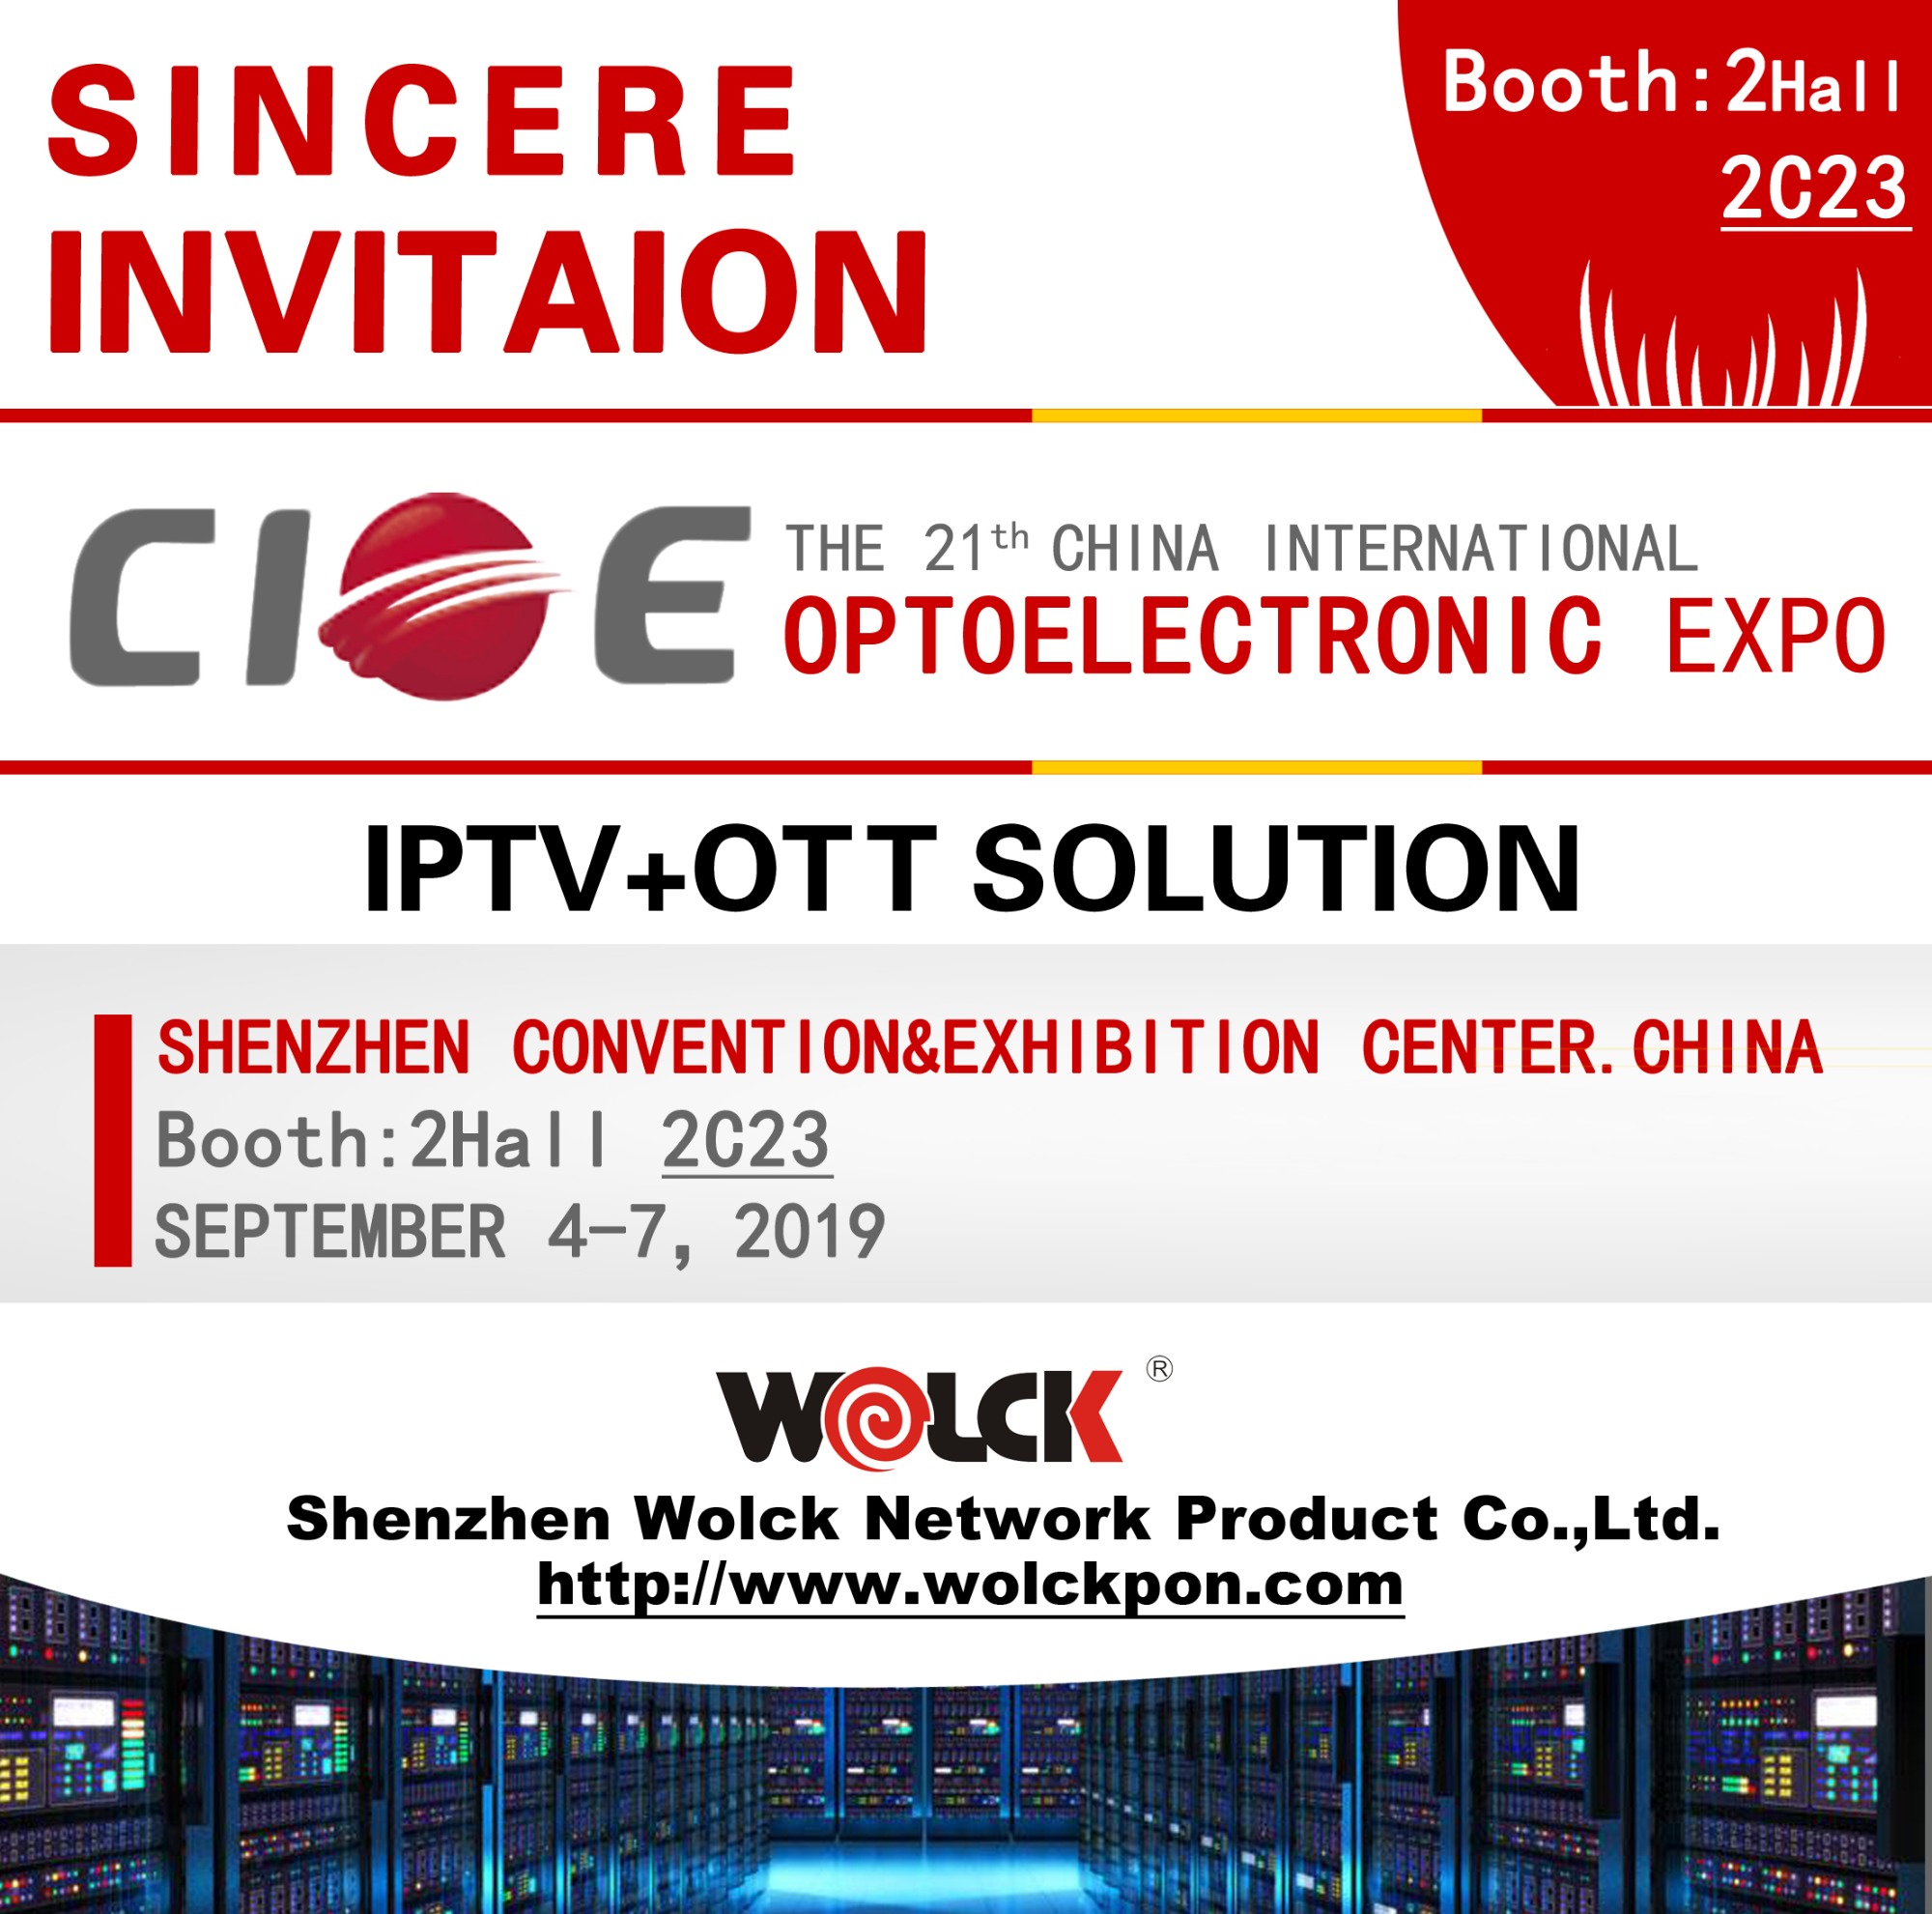 WOLCK invites you to participate in the "21th China International Optoelectronic Exposition (CIOE2019)"